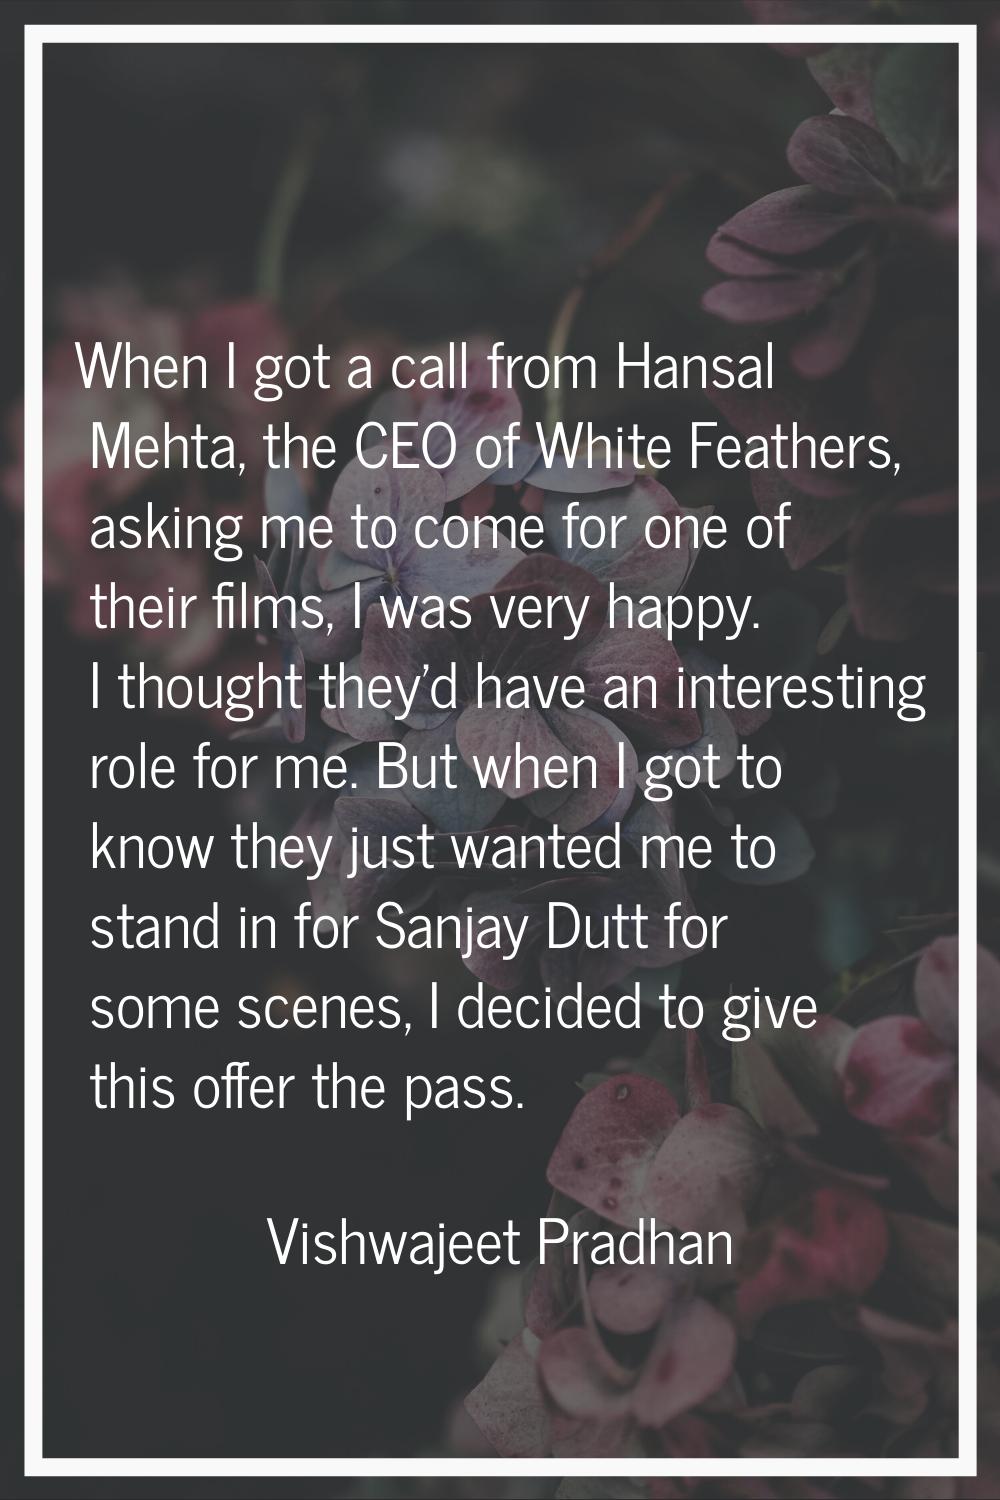 When I got a call from Hansal Mehta, the CEO of White Feathers, asking me to come for one of their 